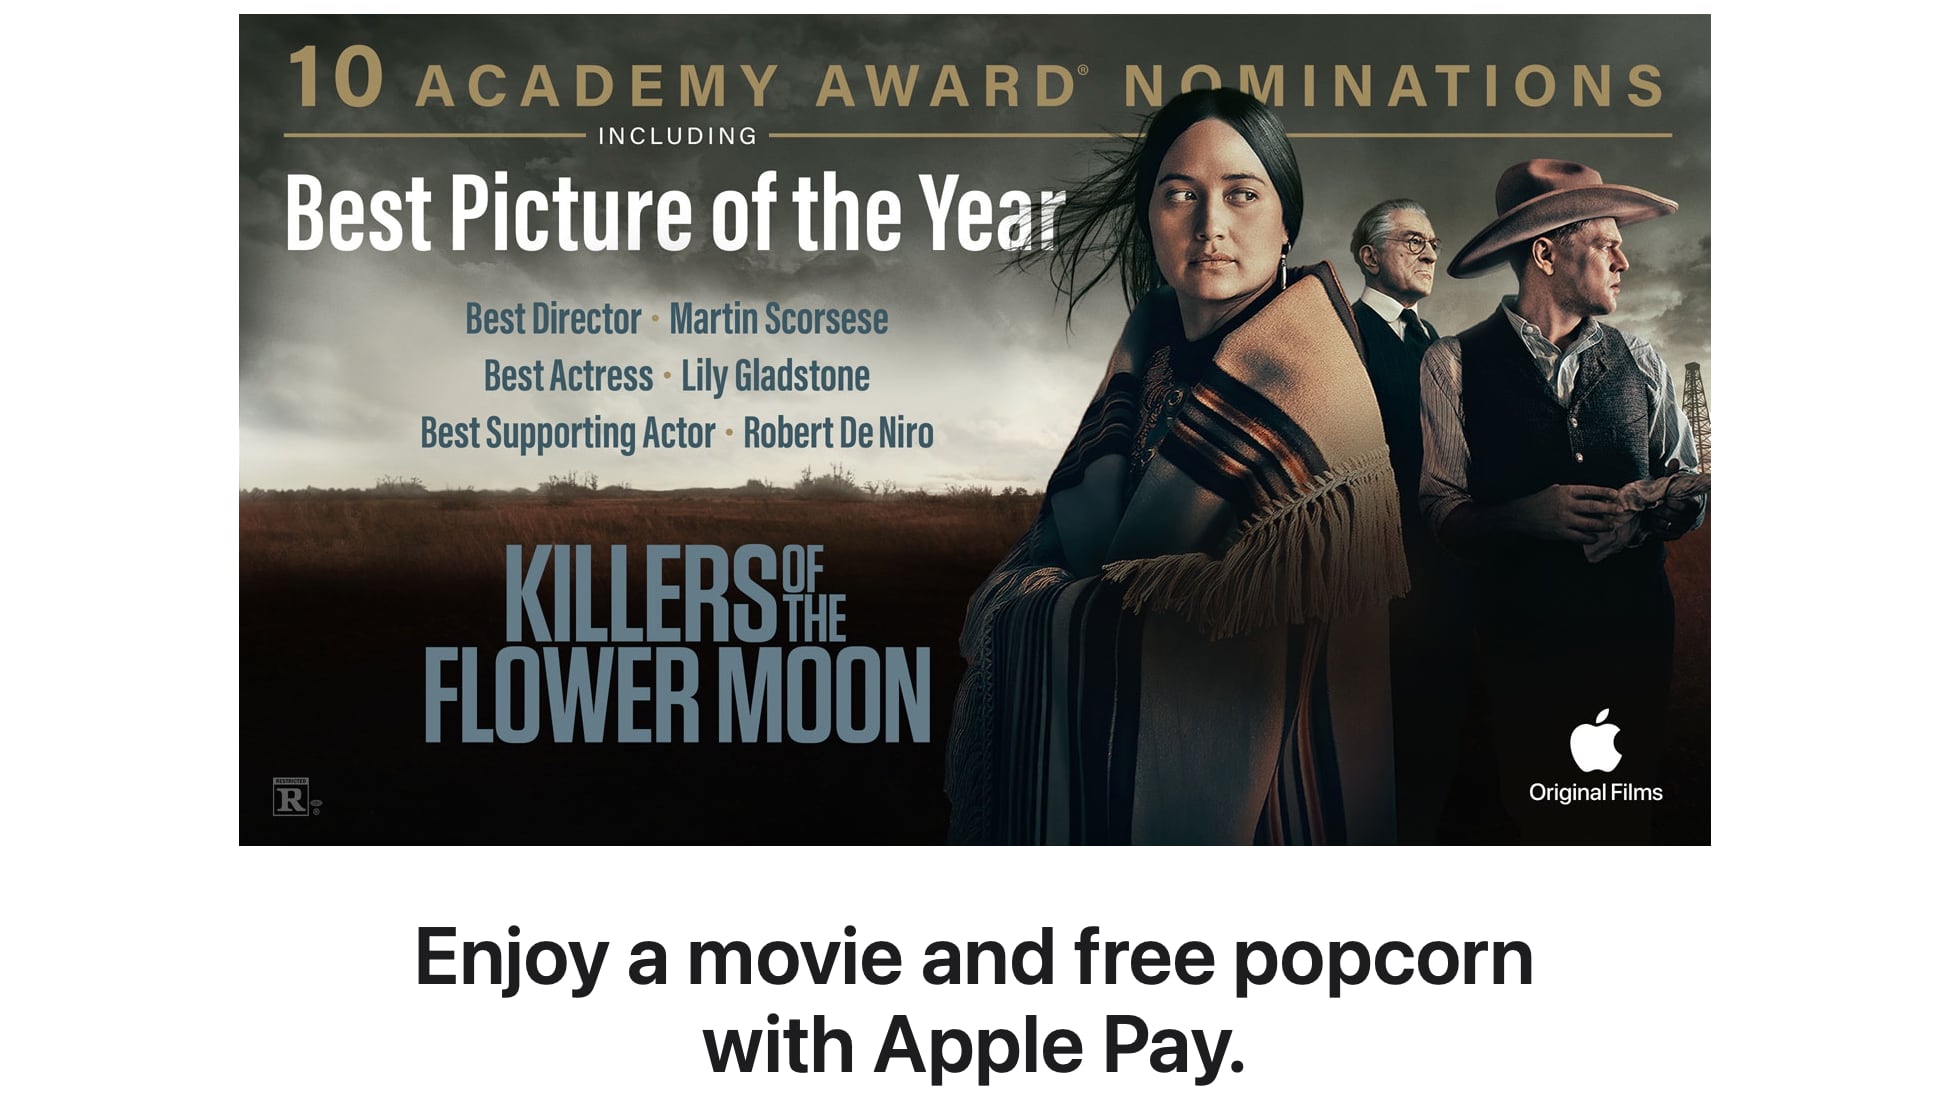 apple pay movie promotion